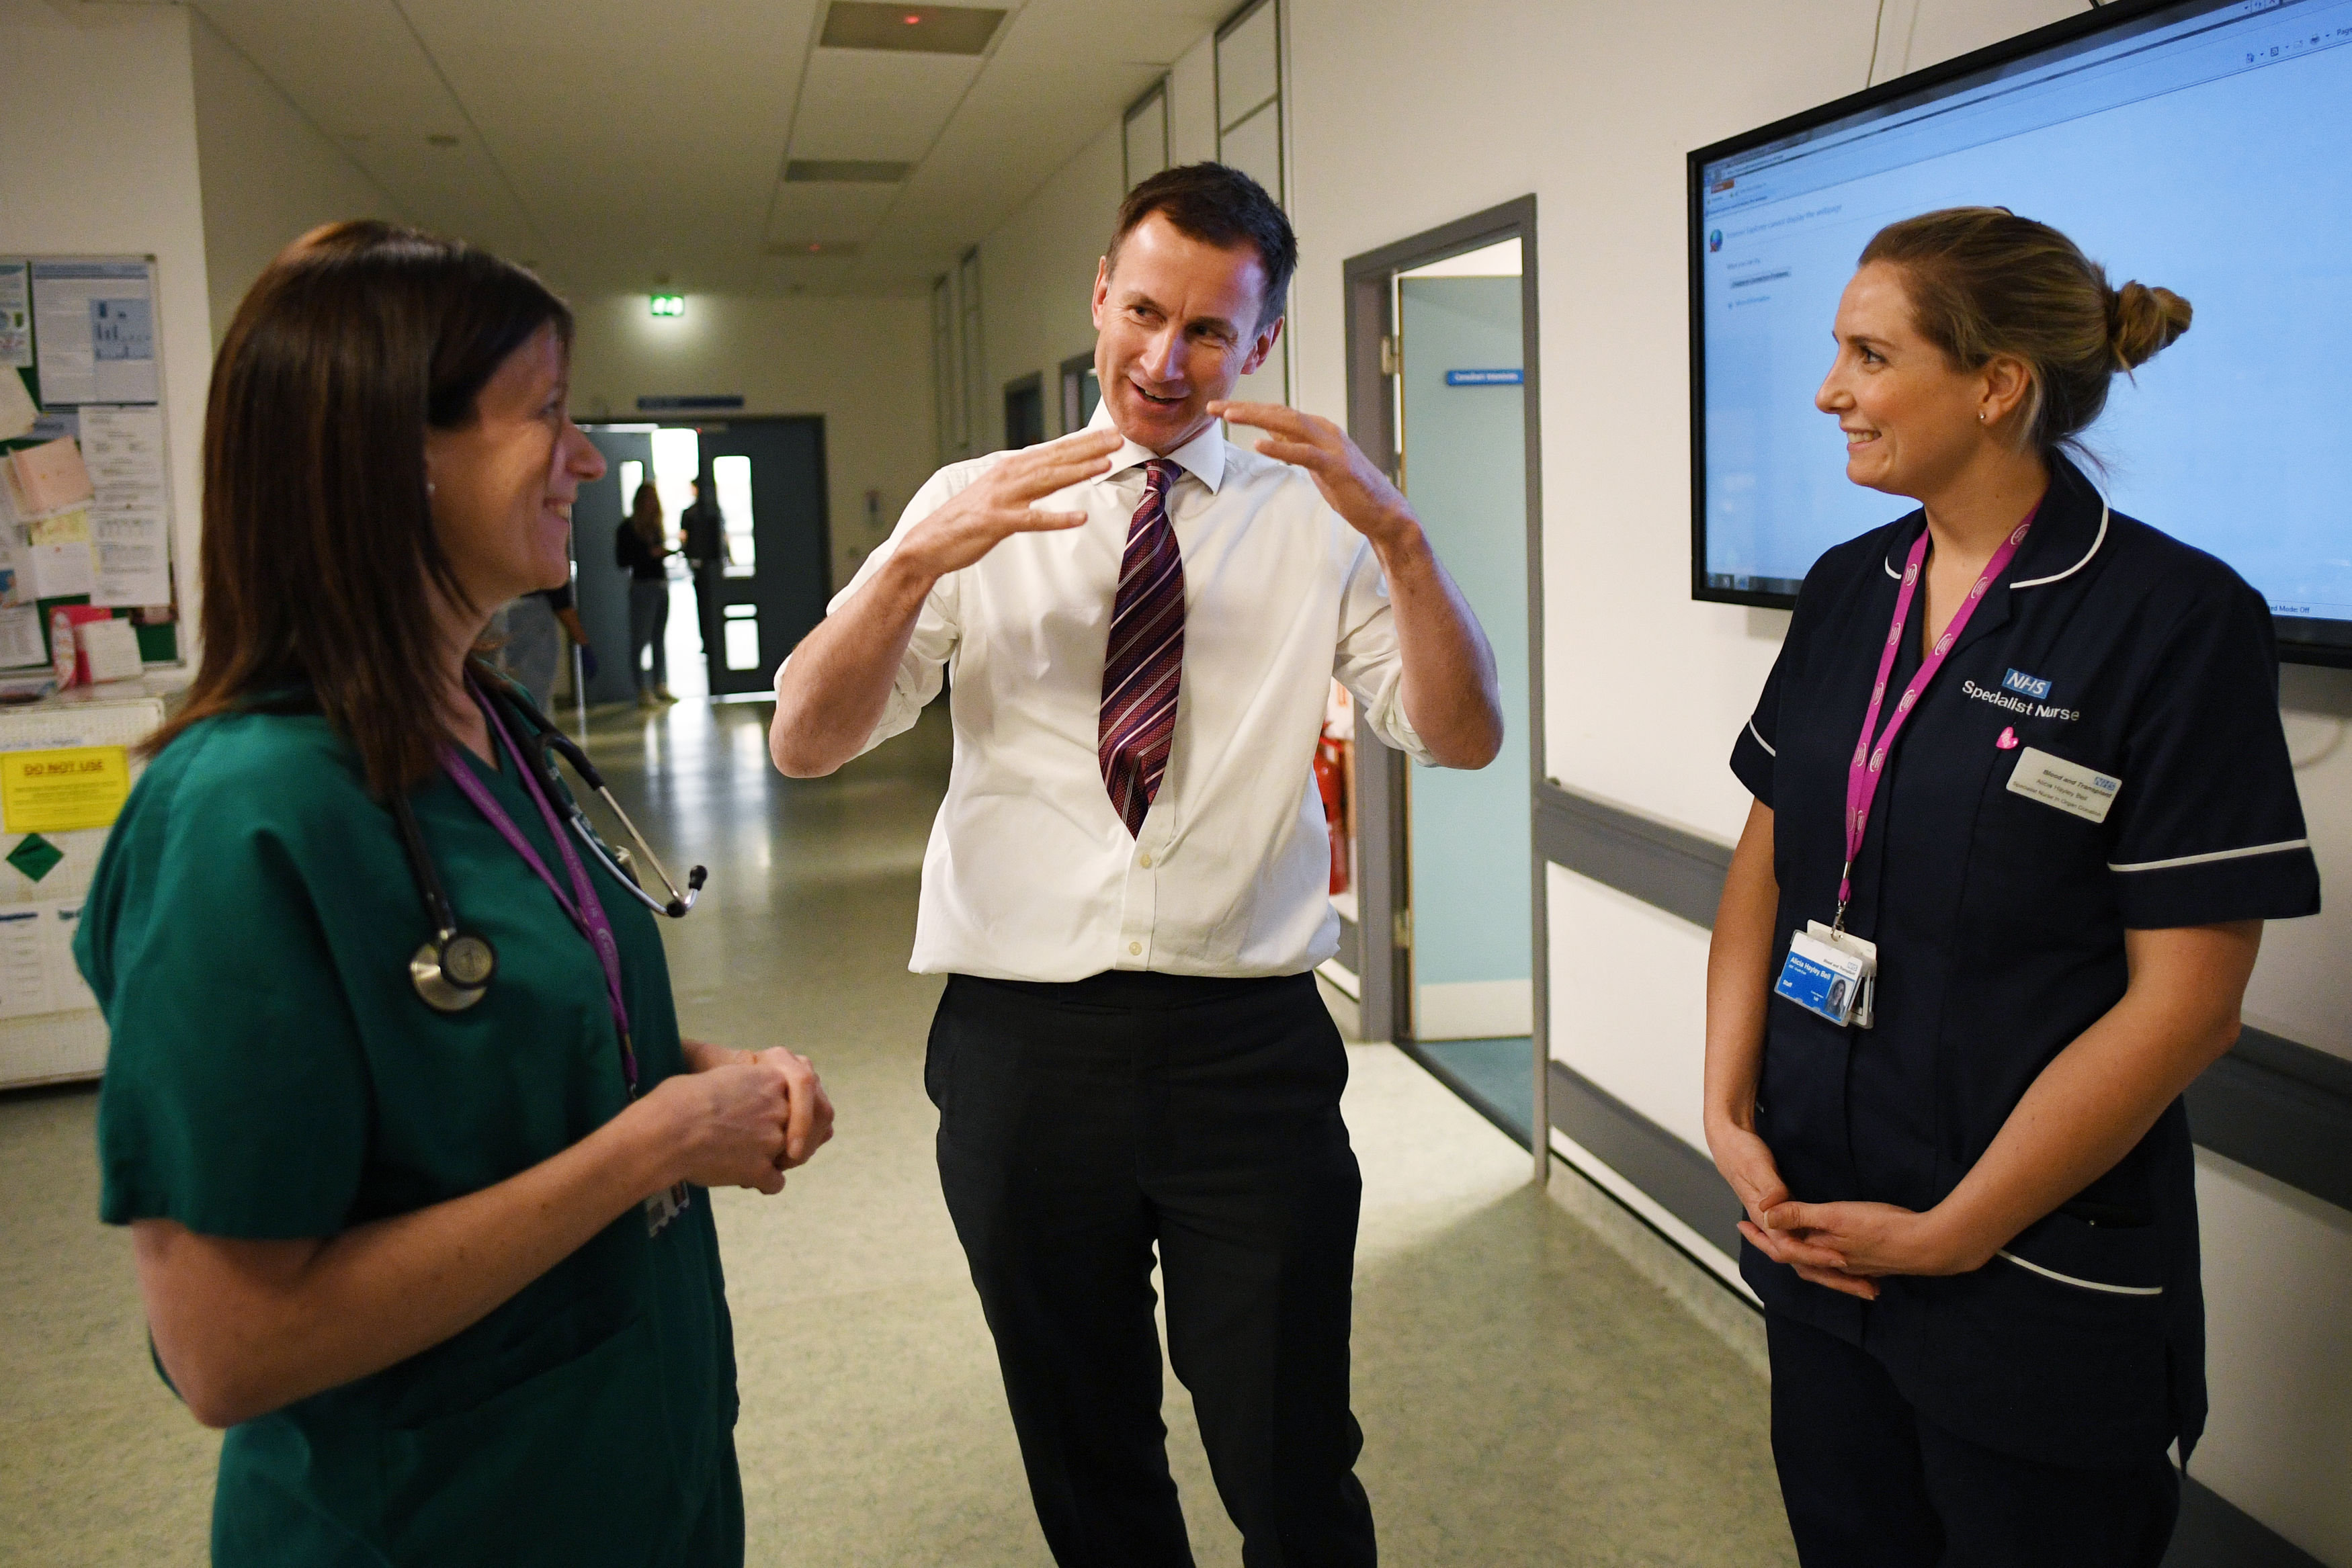 Jeremy Hunt talks to staff at St George's Hospital, Tooting.